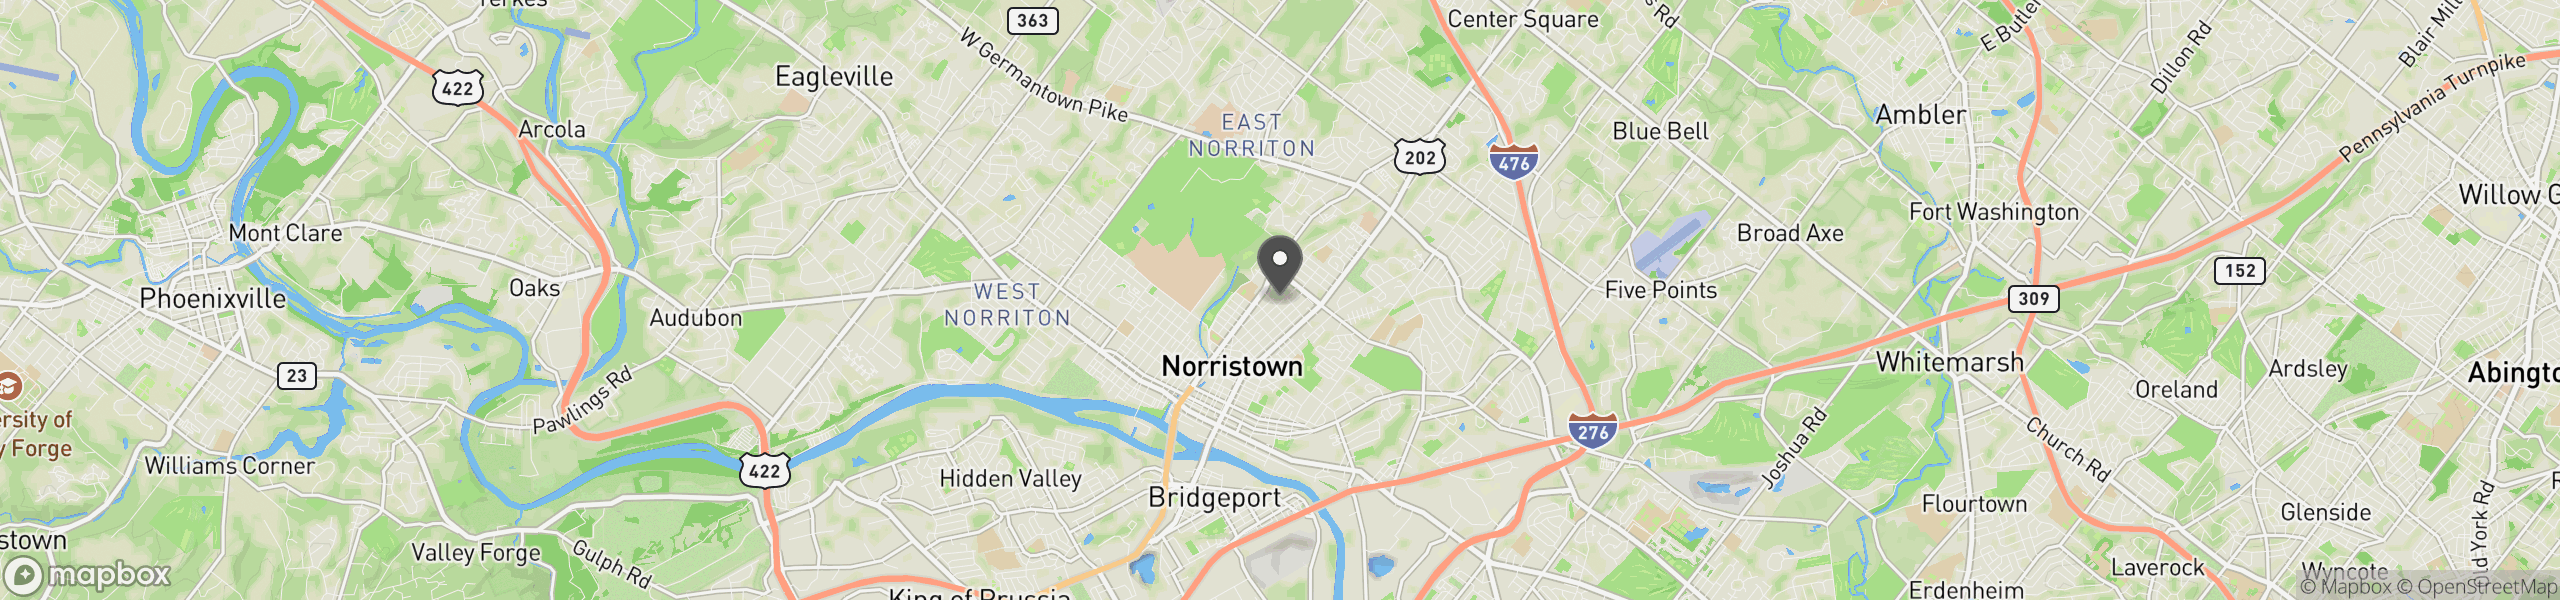 Norristown, PA